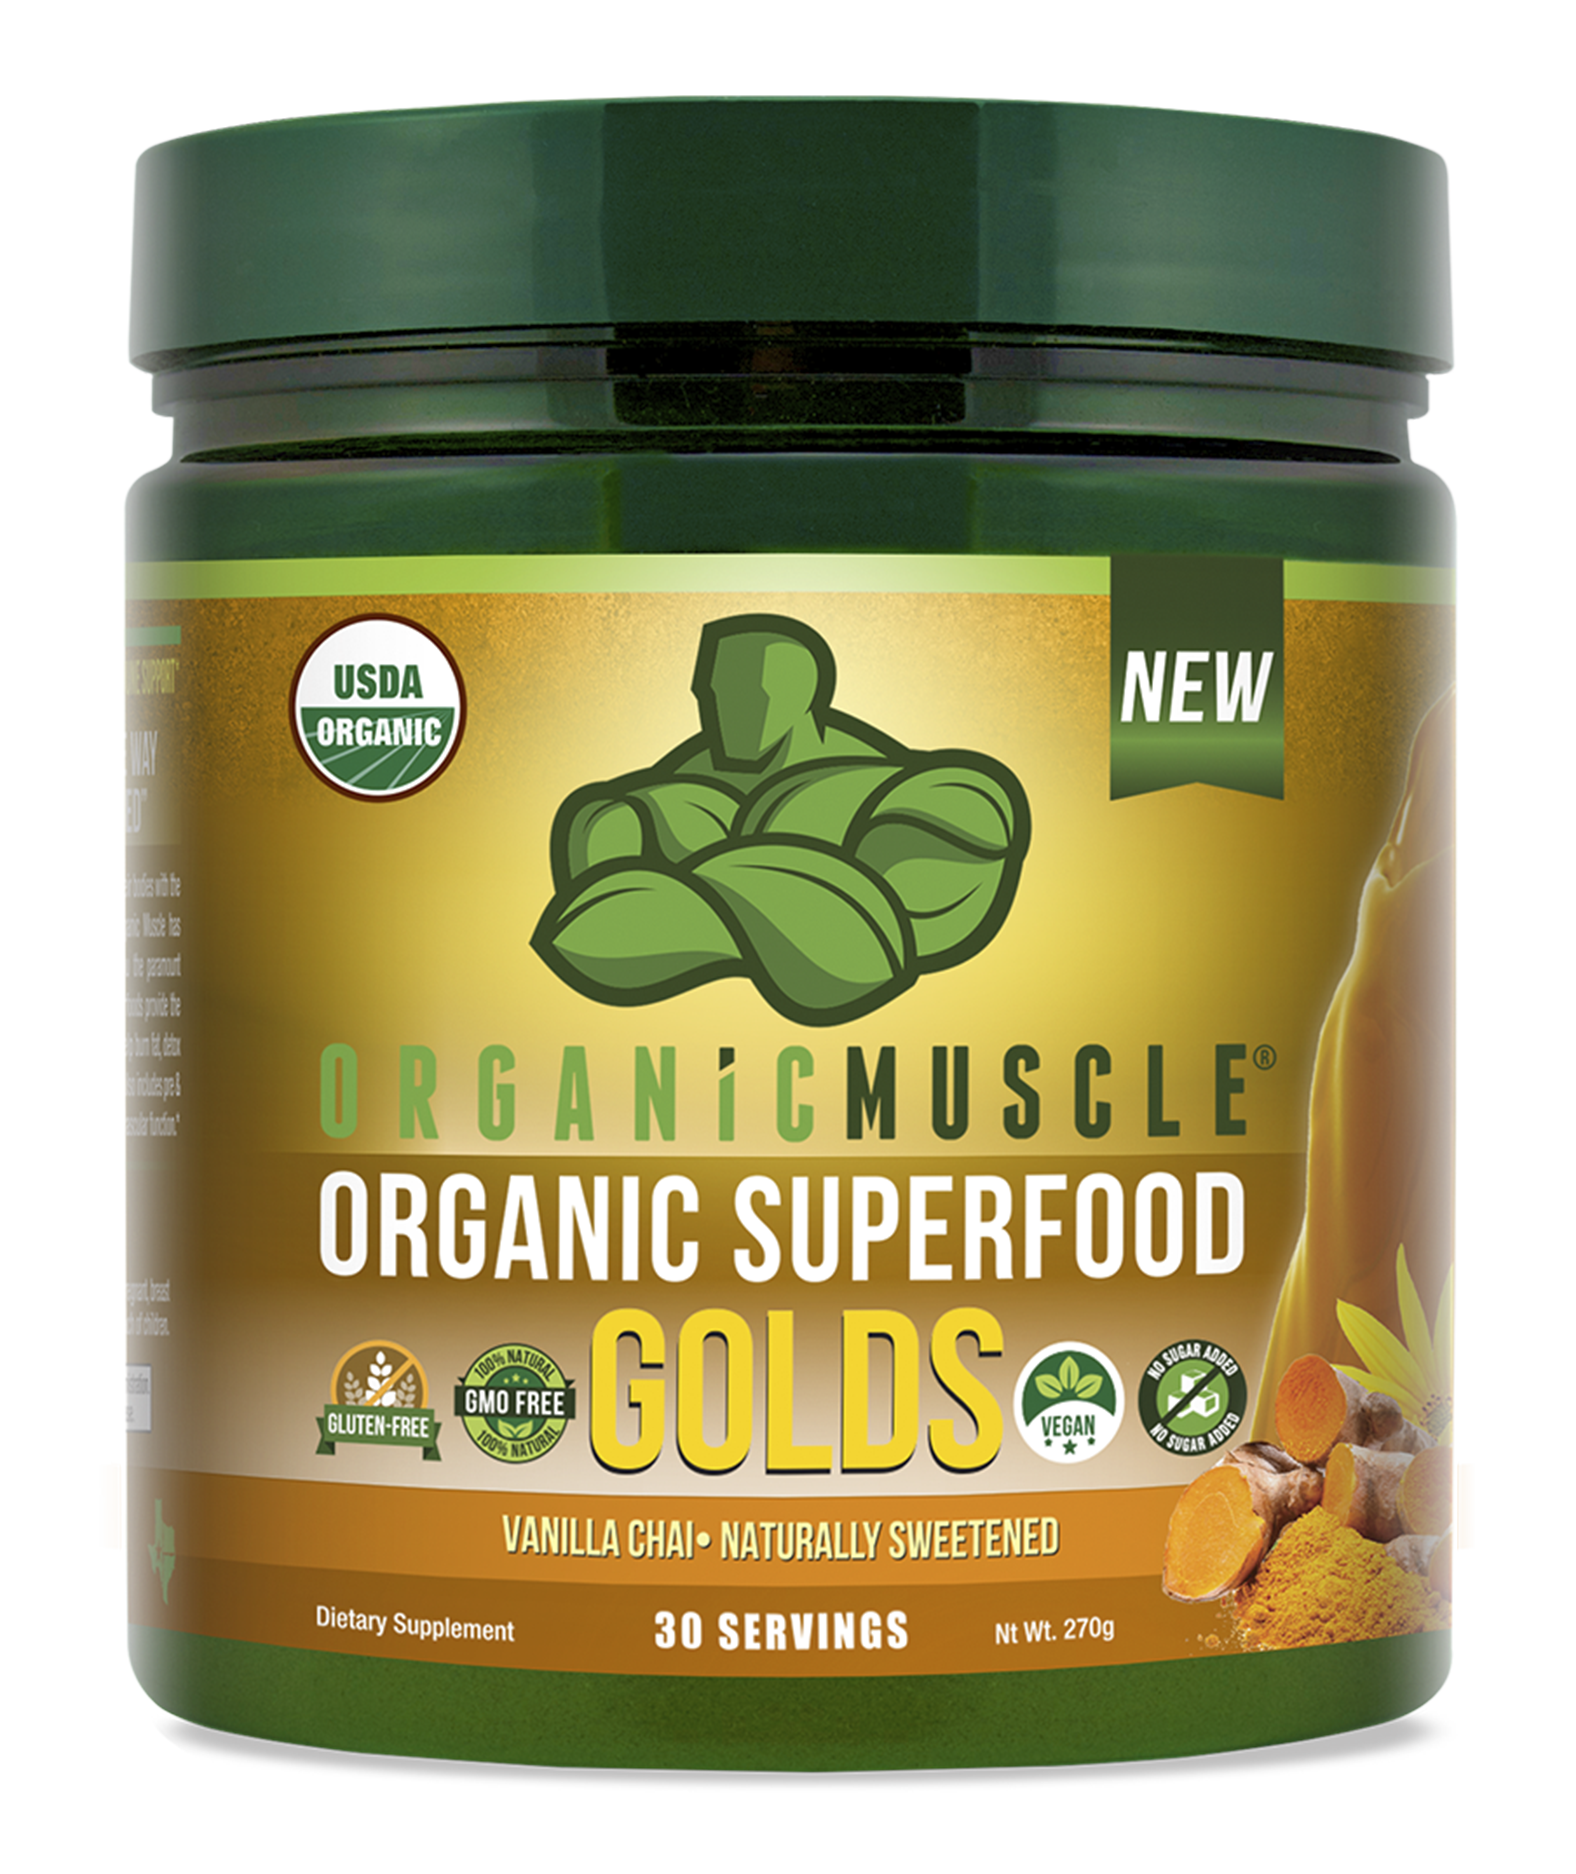 Superfood Golds - Vanilla Chai - 30 Servings